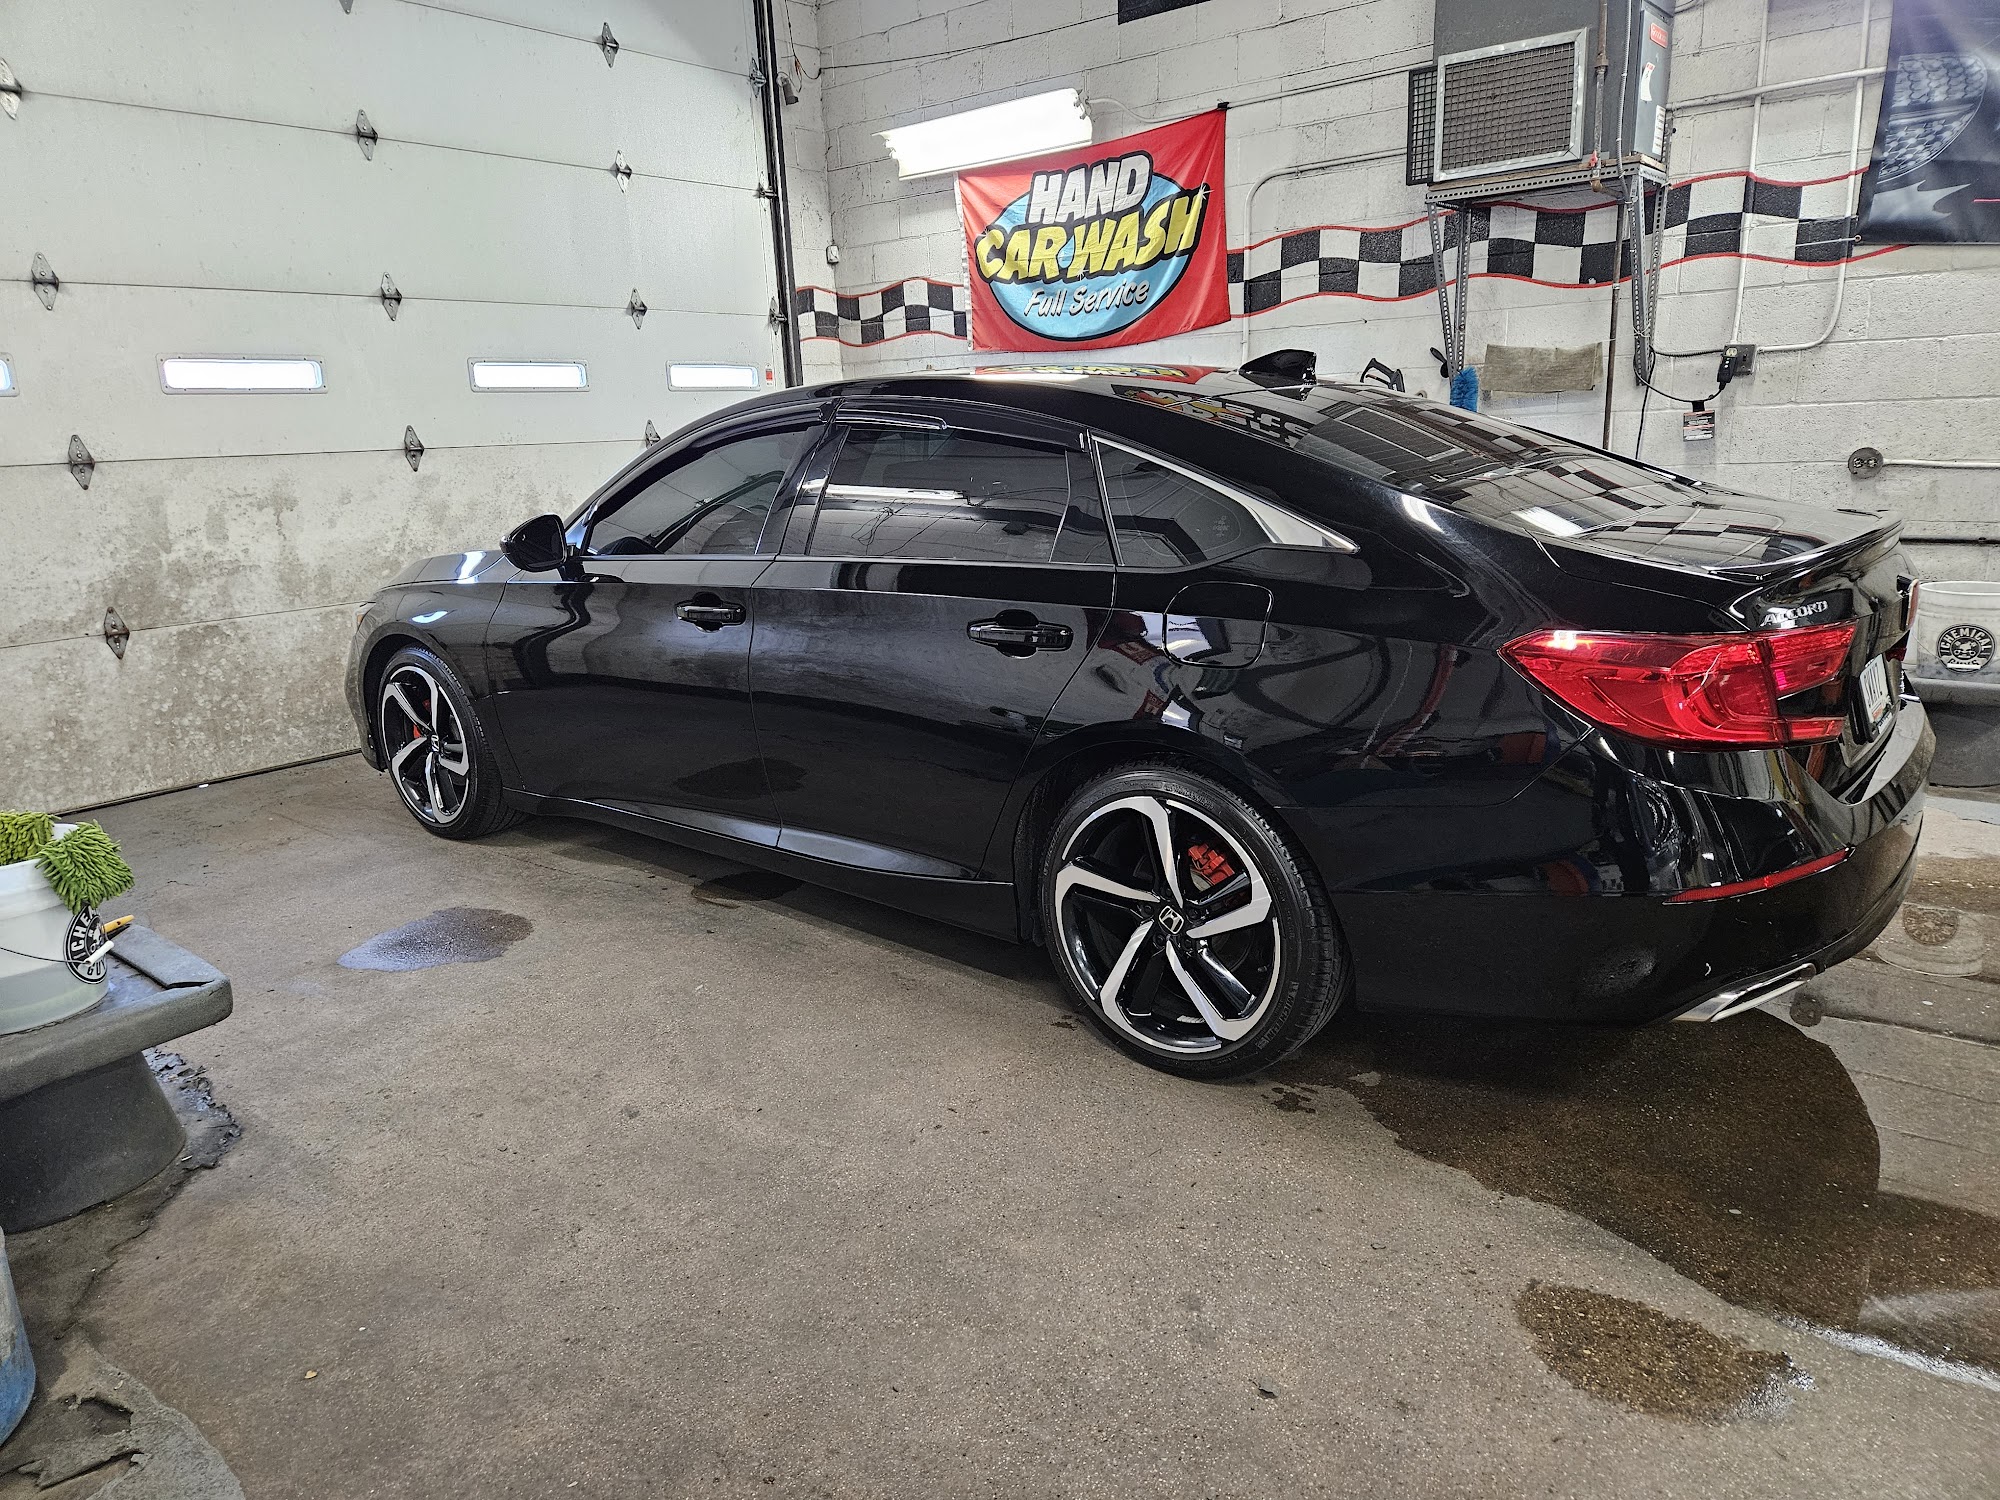 Drop Zone Detailing 1918 Calumet Ave, Whiting Indiana 46394